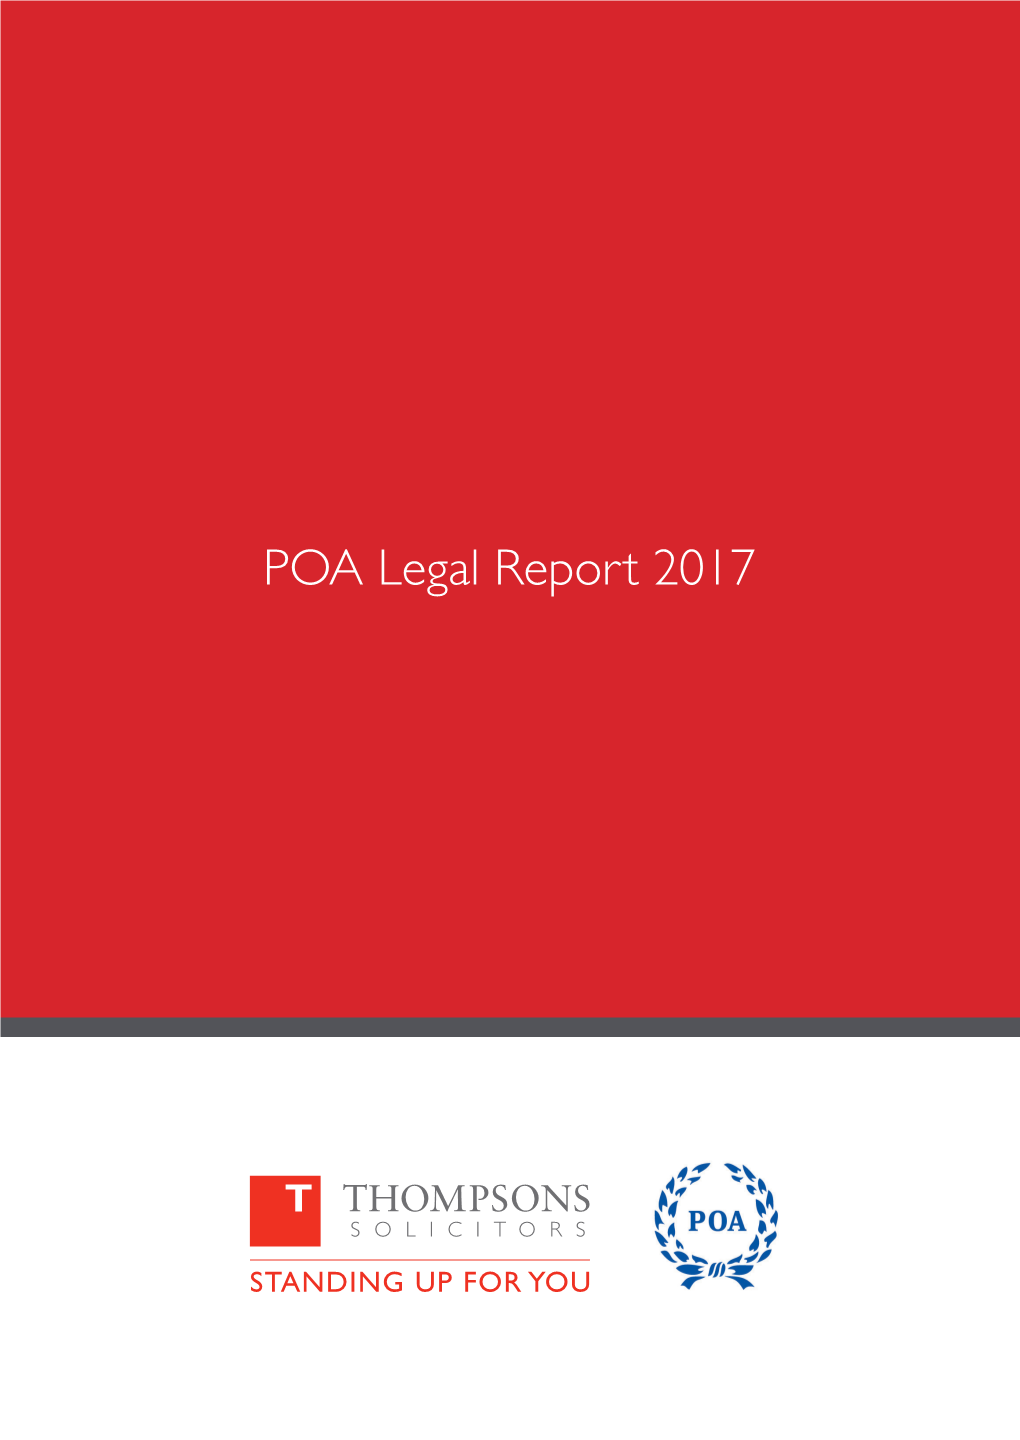 POA Legal Report 2017 Introduction